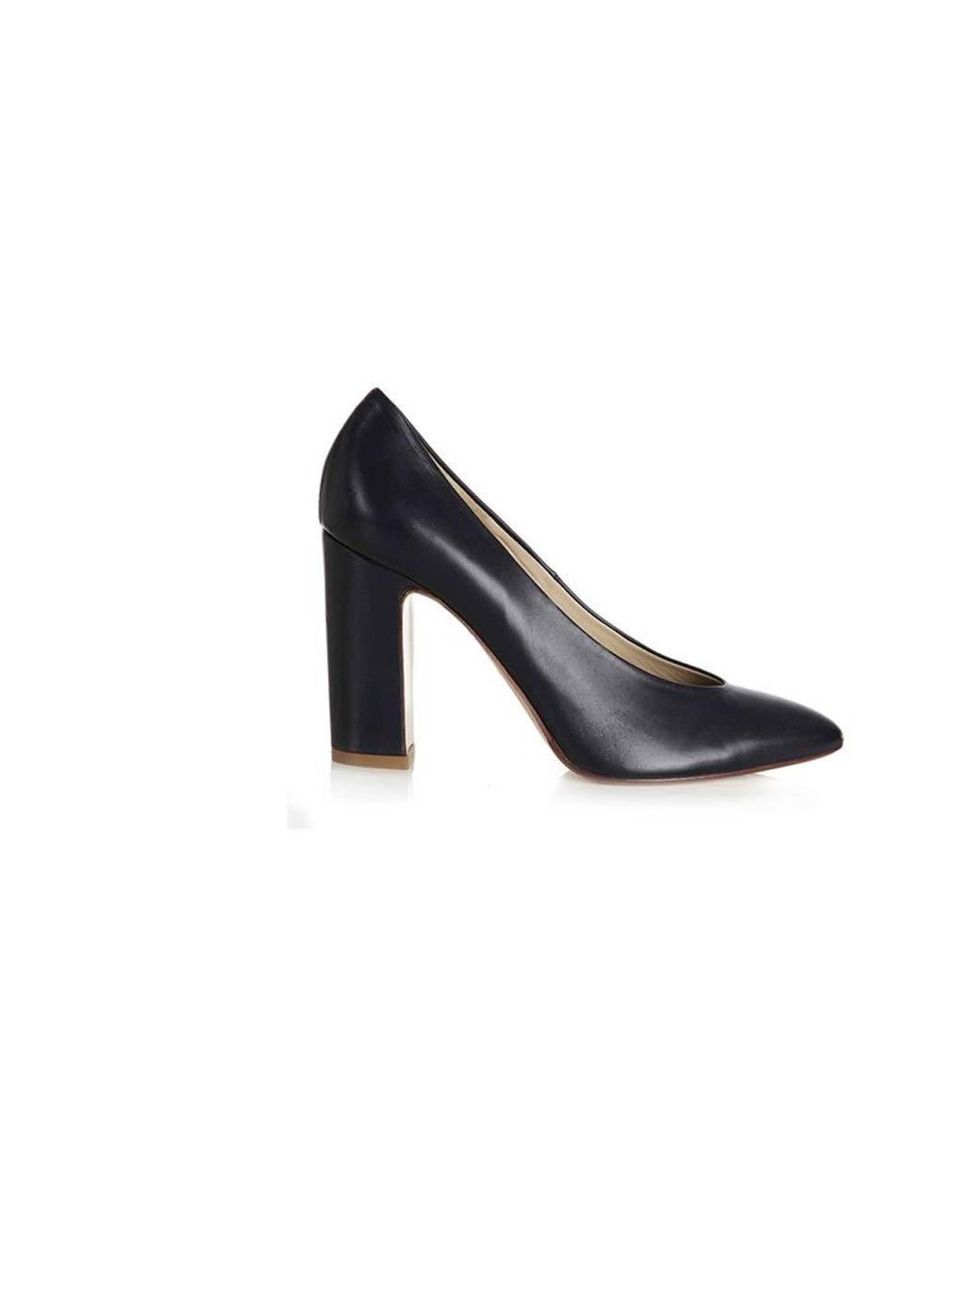 <p>Add a pair of heels like these from <a href="http://www.hobbs.co.uk/product/display?productID=0213-IA12-007H100&amp;productvarid=0213-IA12-007H100-NAVY-36_5&amp;refpage=shoes">Hobbs</a>, £63</p>